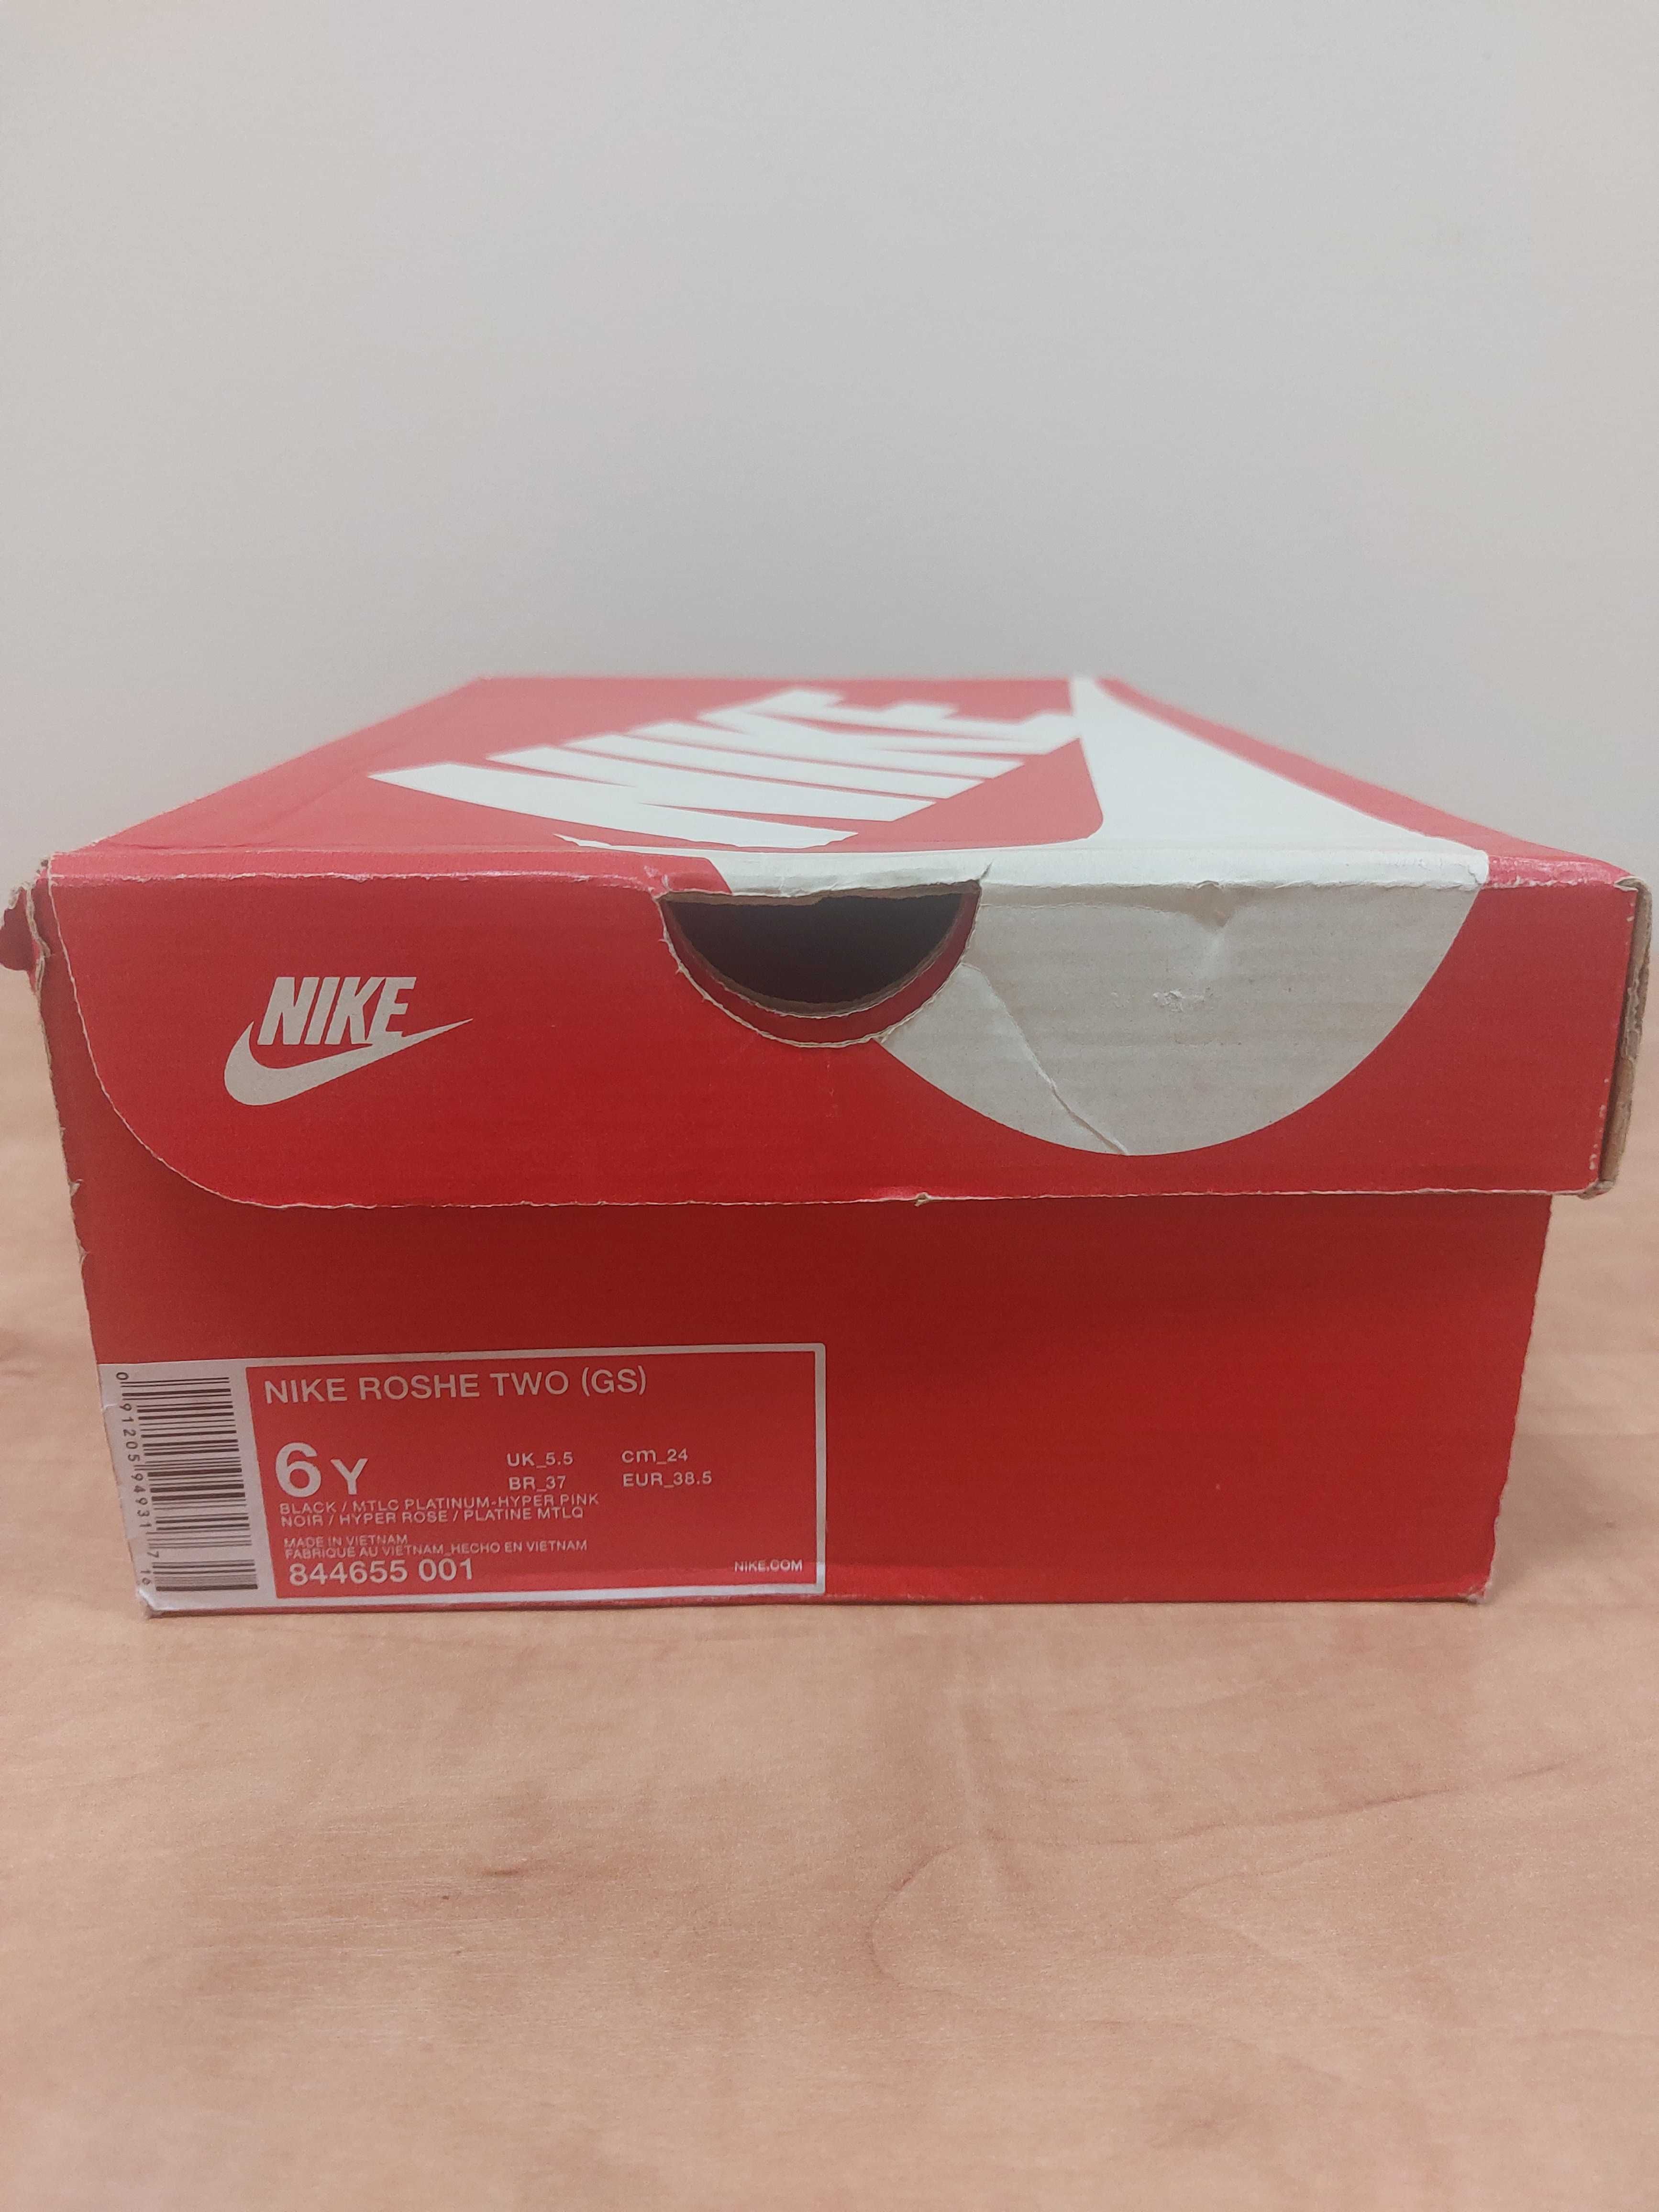 Buty Nike Roshe Two Damskie r. 38,5 Outlet